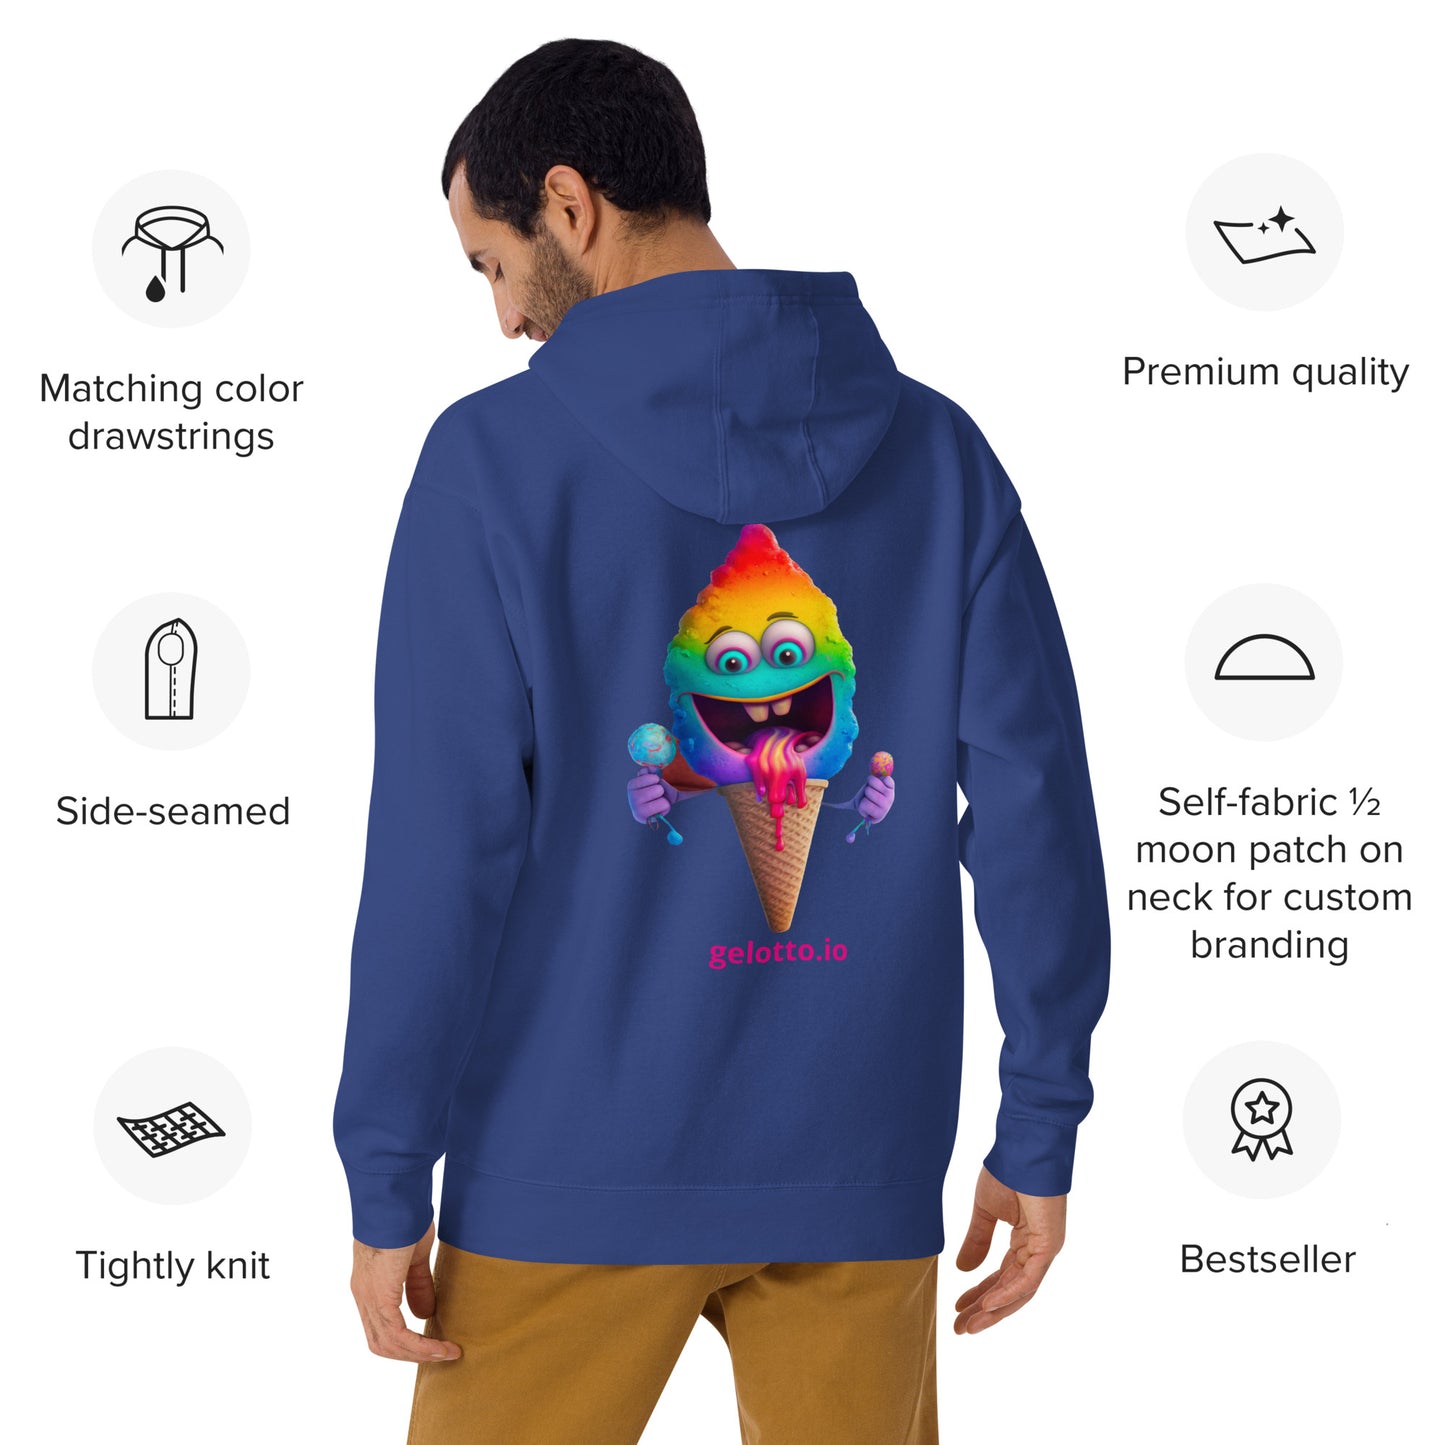 Unisex Hoodie Rainbow Mostro on back, Gold G on front